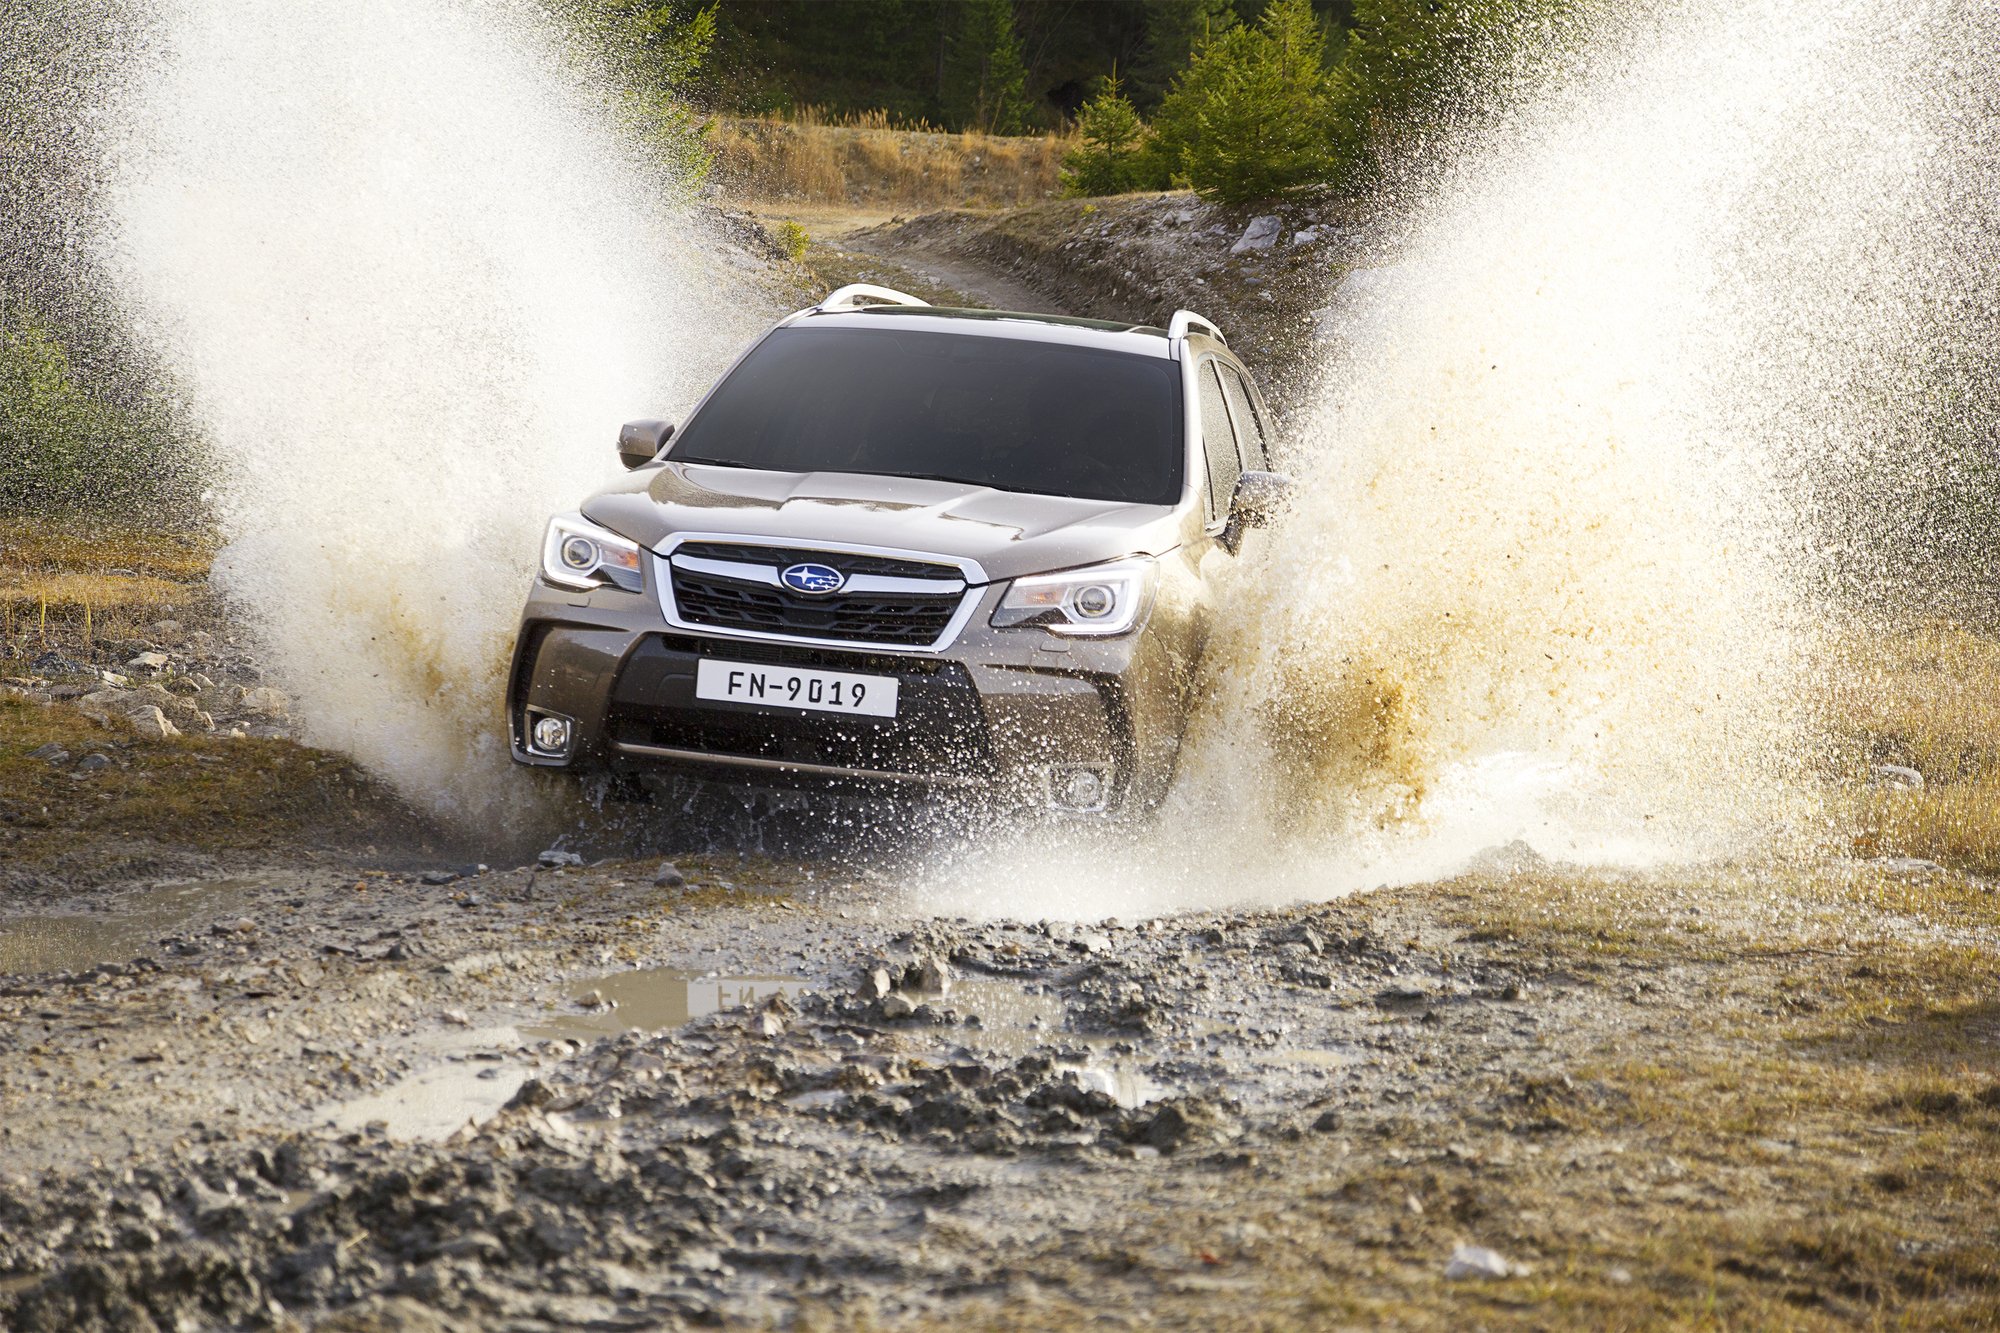 Subaru Forester | Test drive #AMboxing